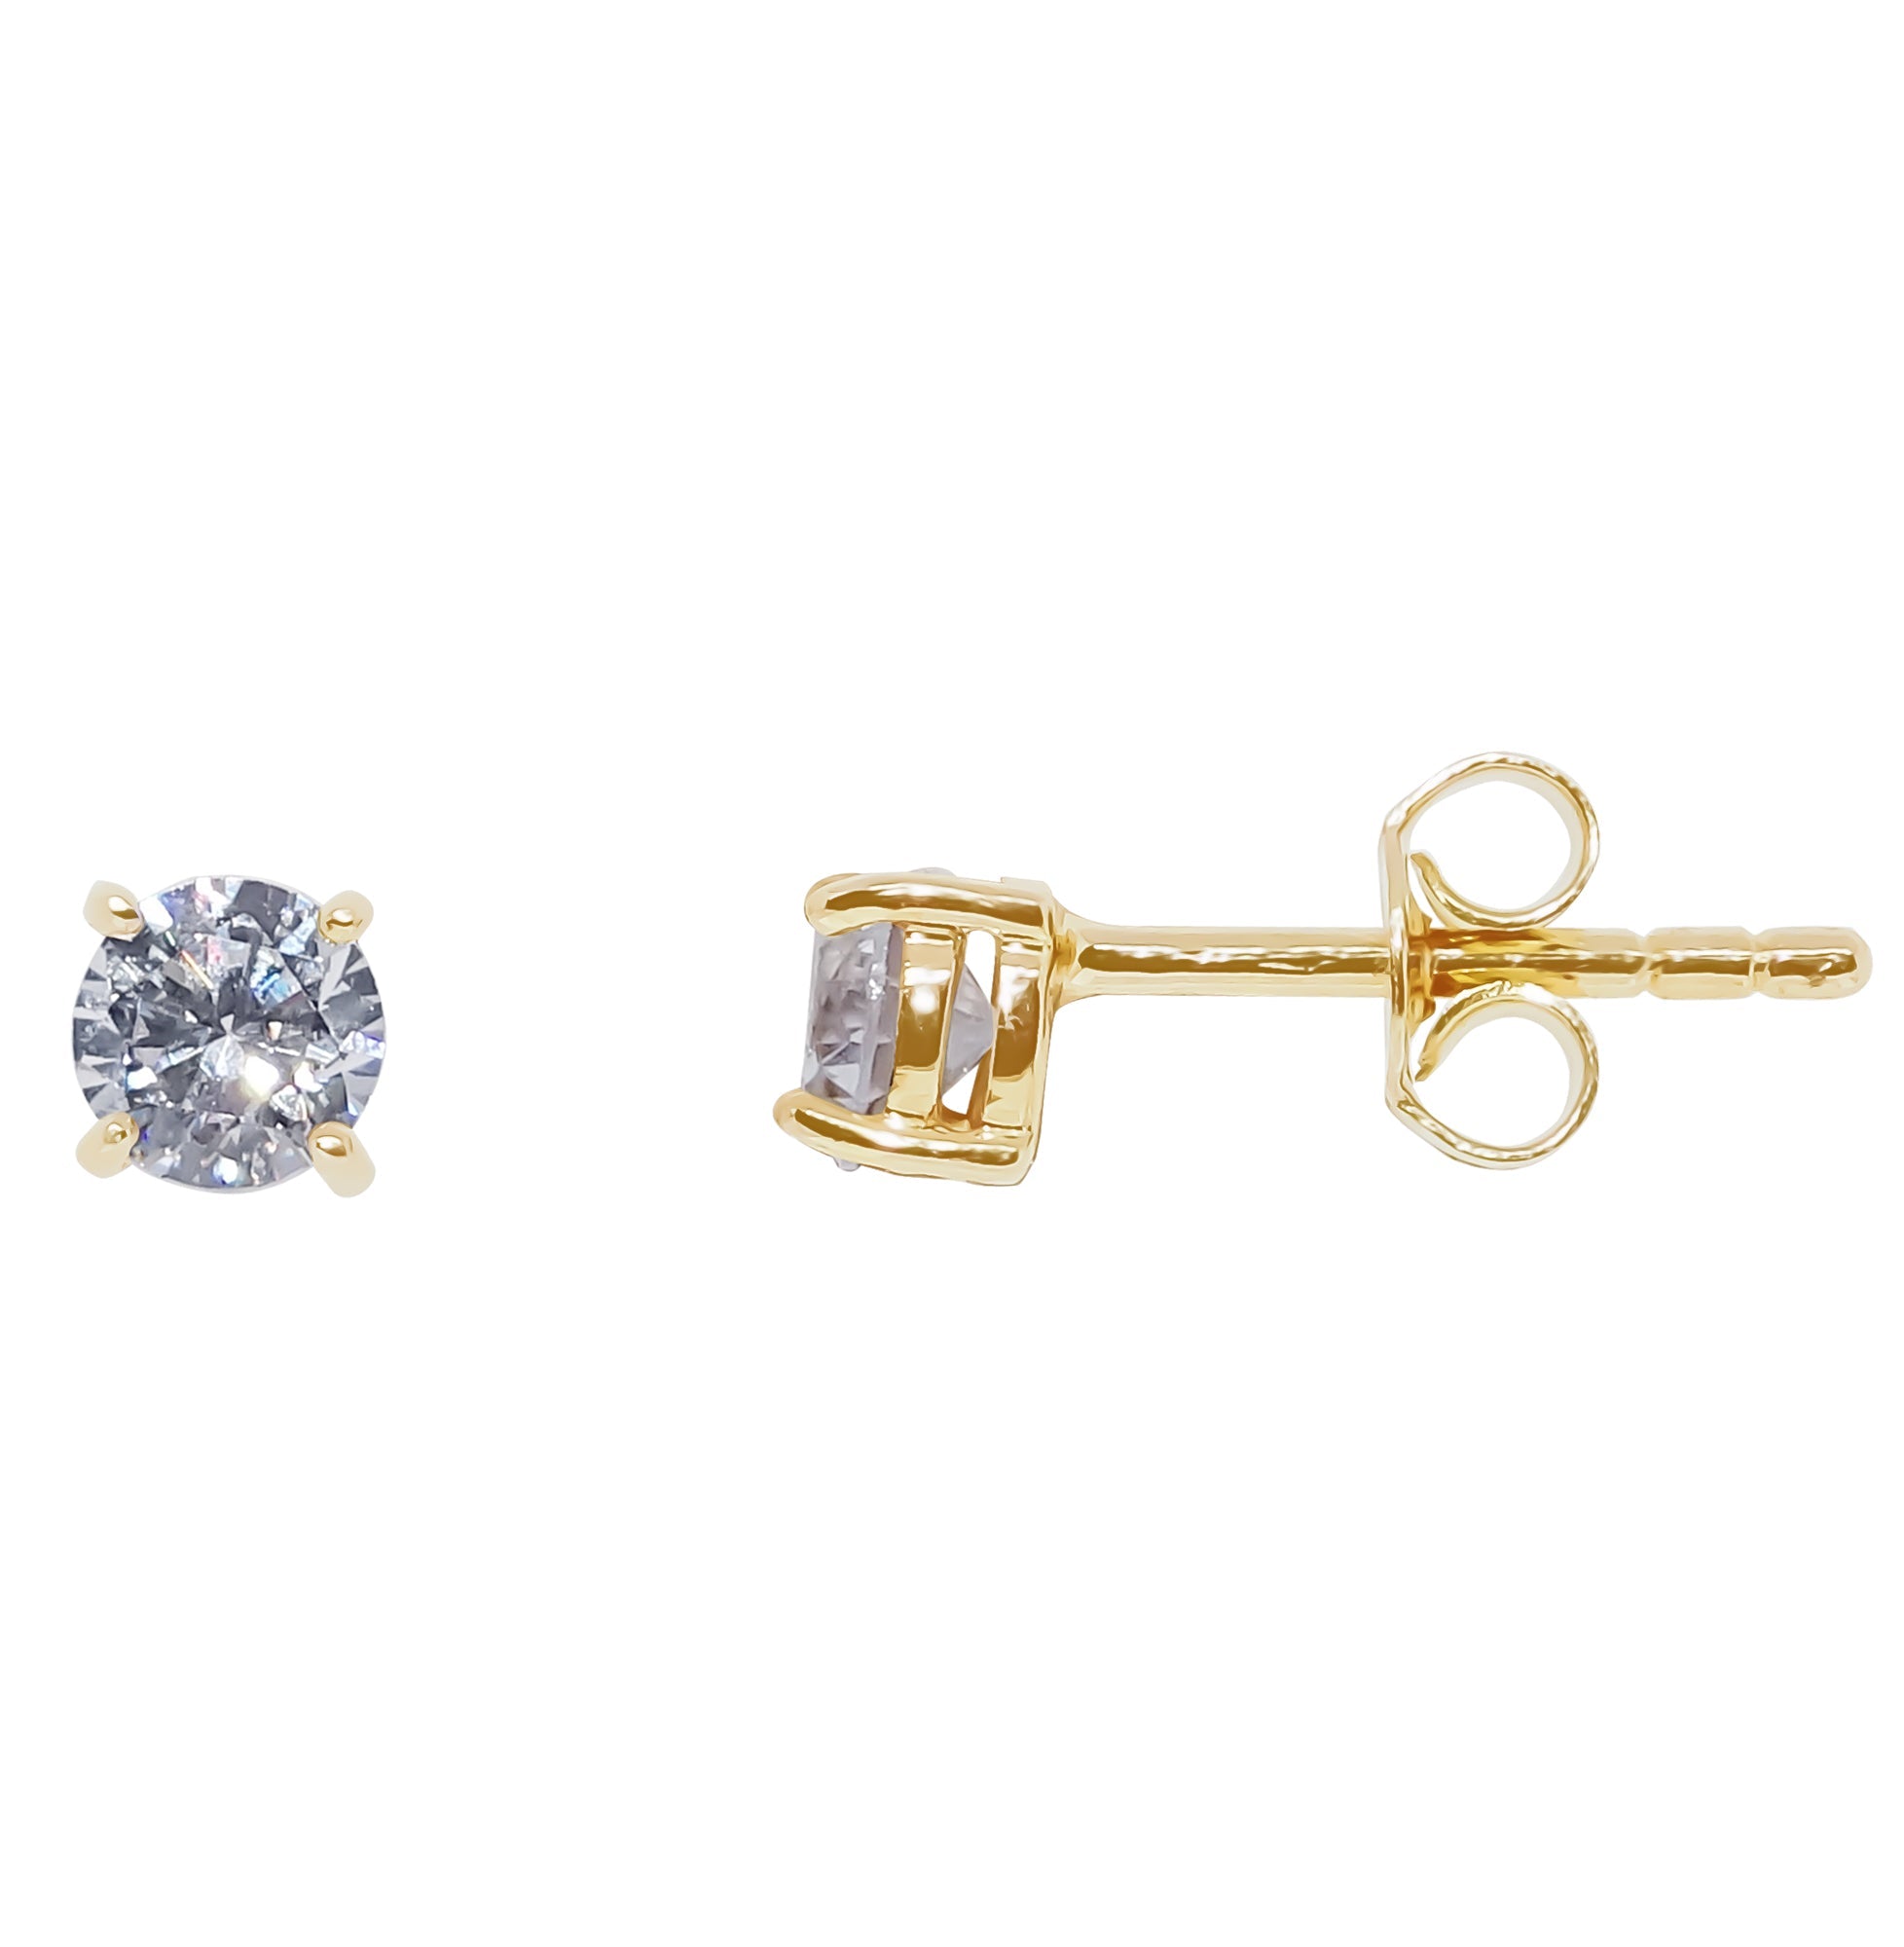 9ct gold 4mm round cz stud earrings